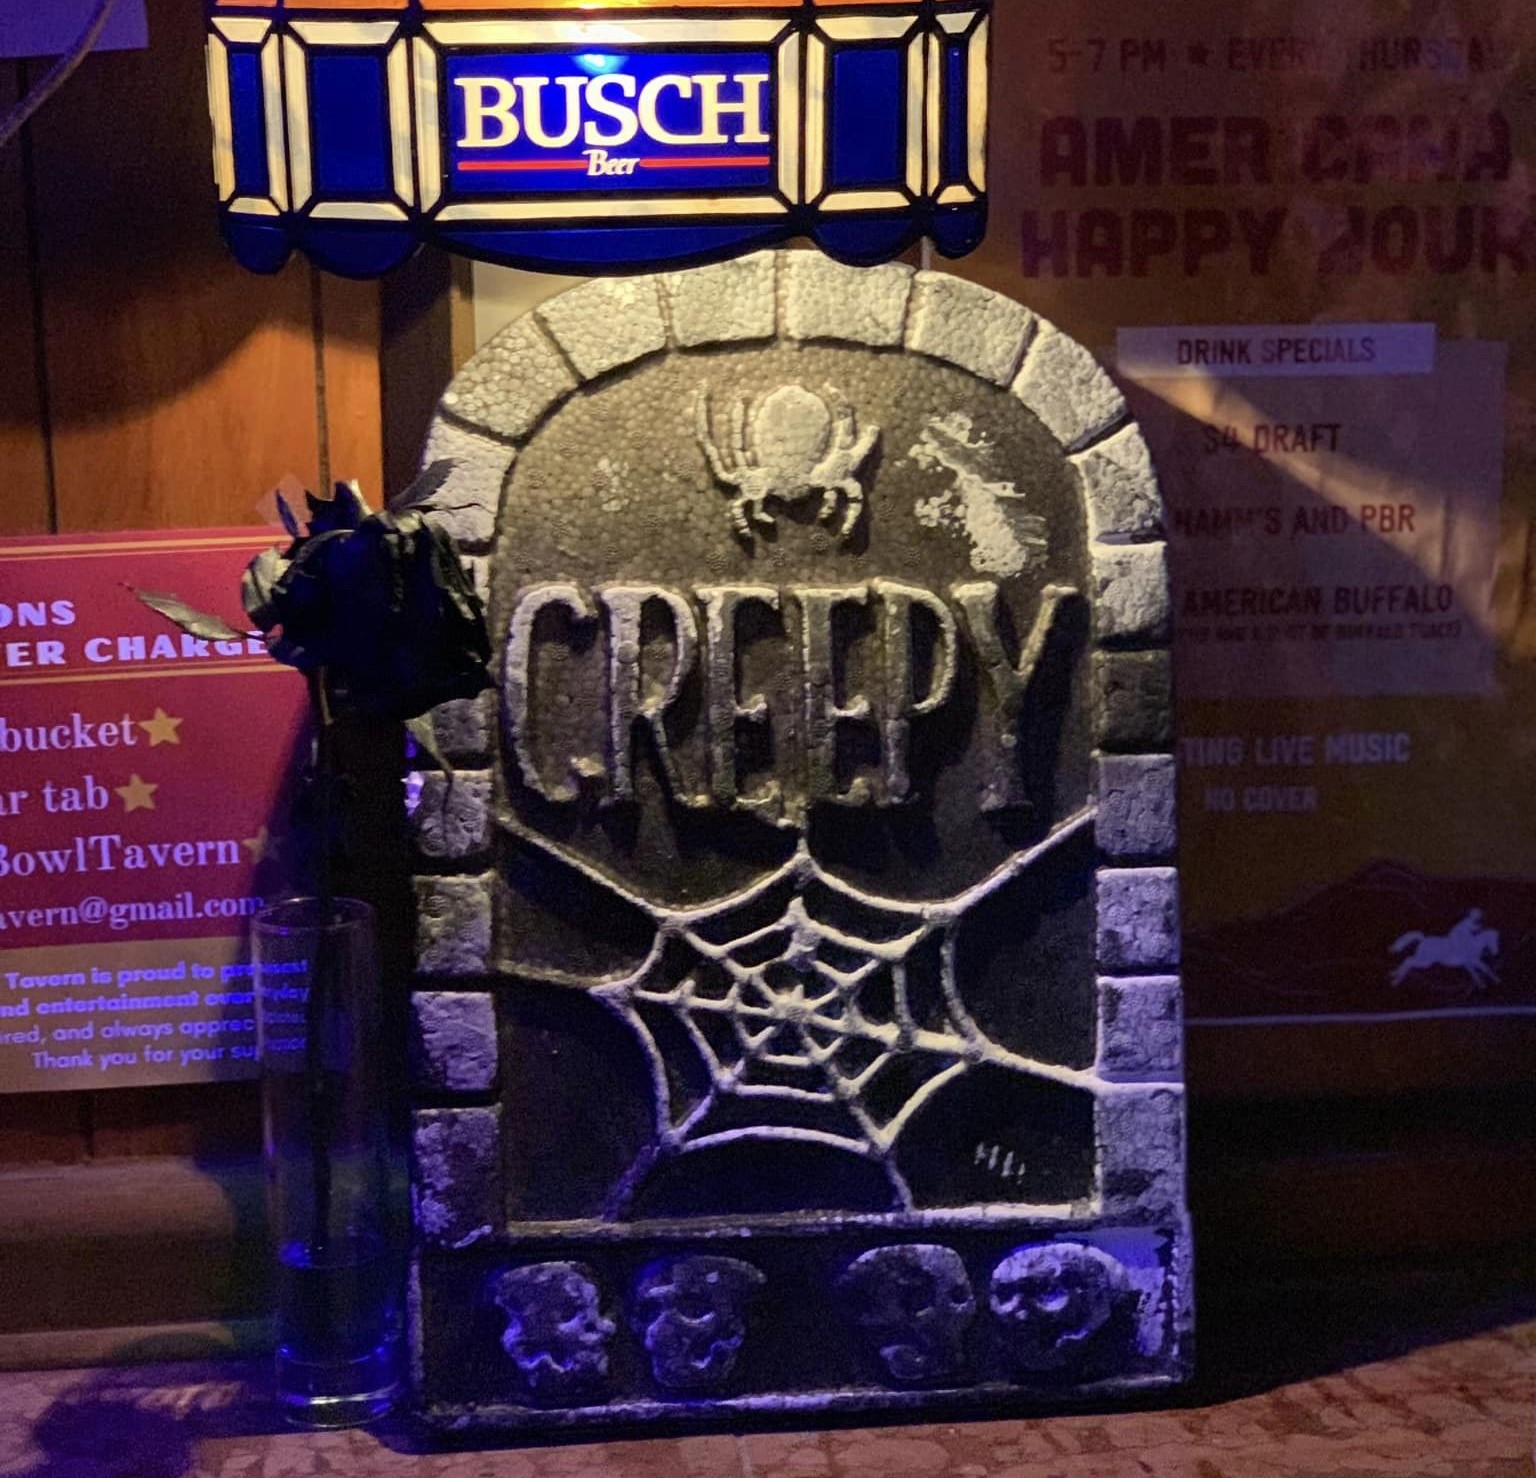 A fake tombstone that says "creepy" and has a spider web and spider on it sits on a counter at a bar. A Busch beer lamp hangs over it.